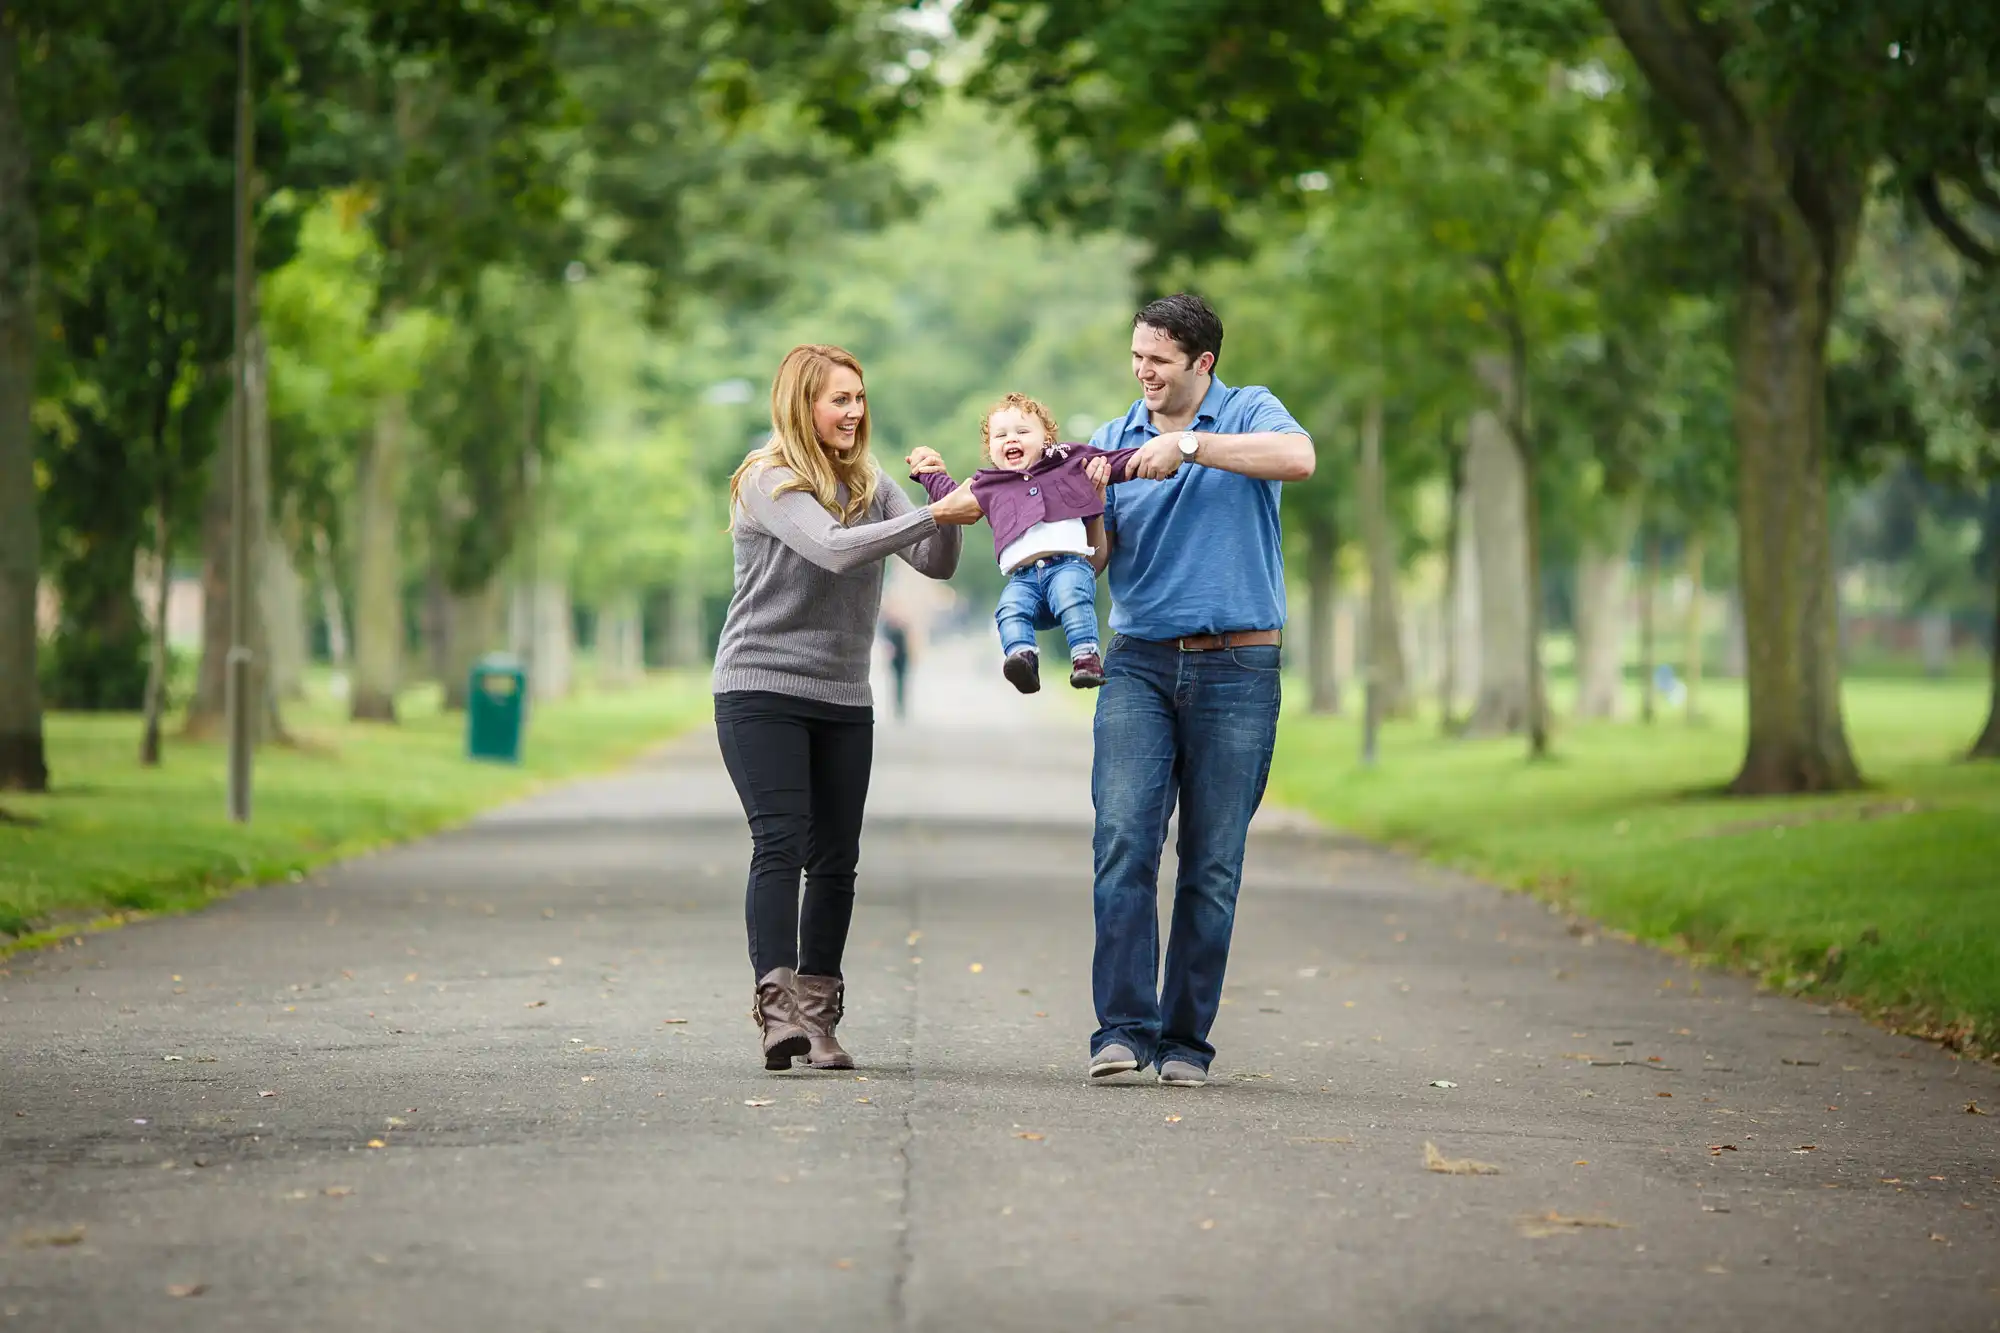 A young couple swinging their toddler in the air while walking on a tree-lined path in a park.